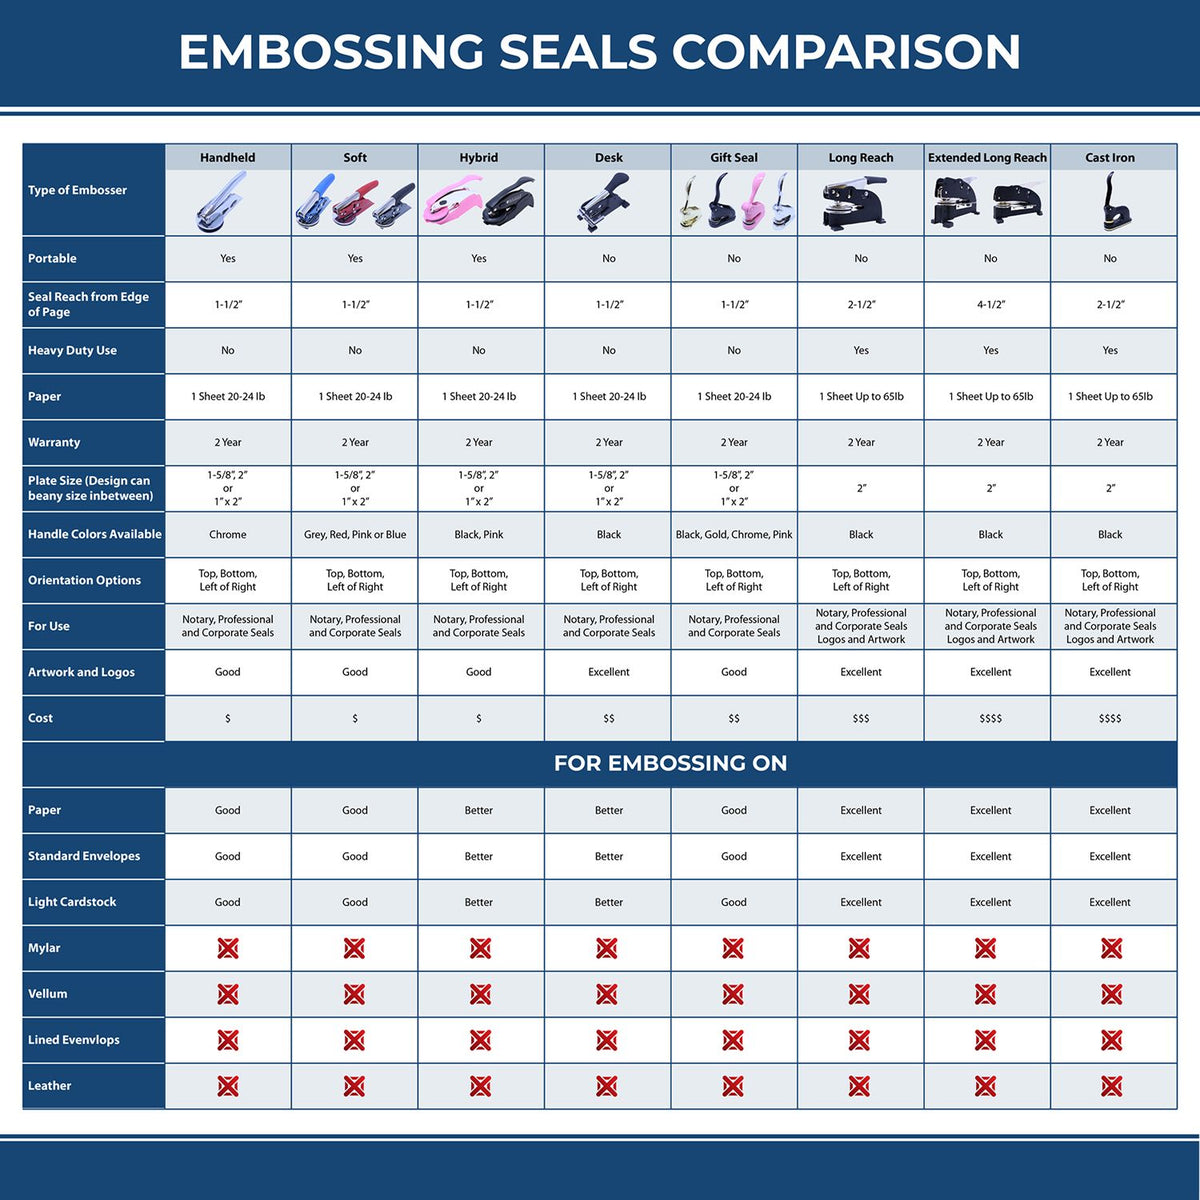 A comparison chart for the different types of mount models available for the Handheld Kansas Professional Engineer Embosser.